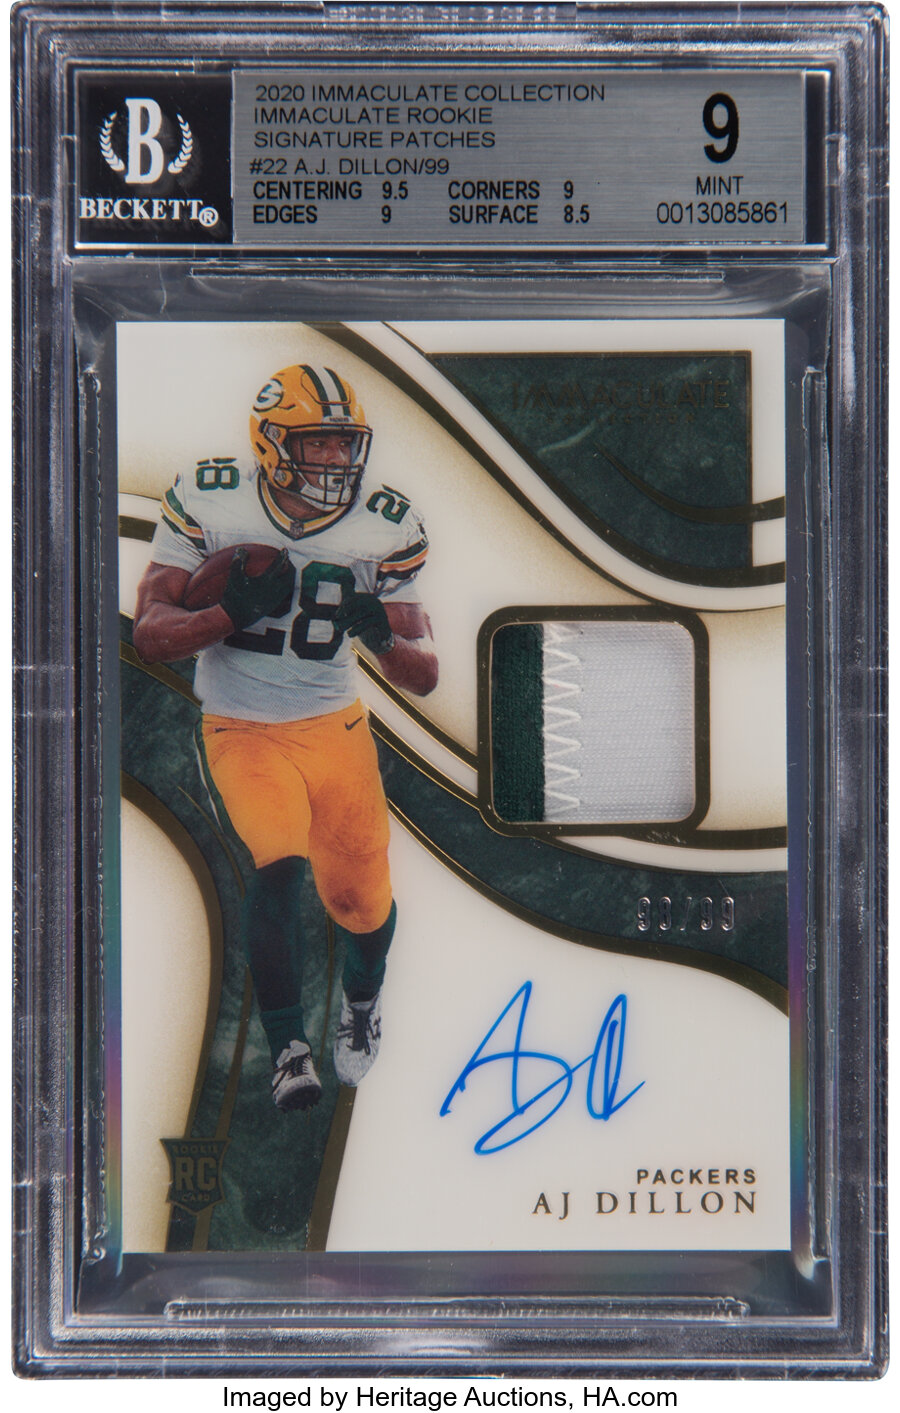 2020 Panini Immaculate Collection A.J. Dillon (Rookie Immaculate Signature Patches) #ISP22 BGS Mint 9, Auto 10, #'d 98/99